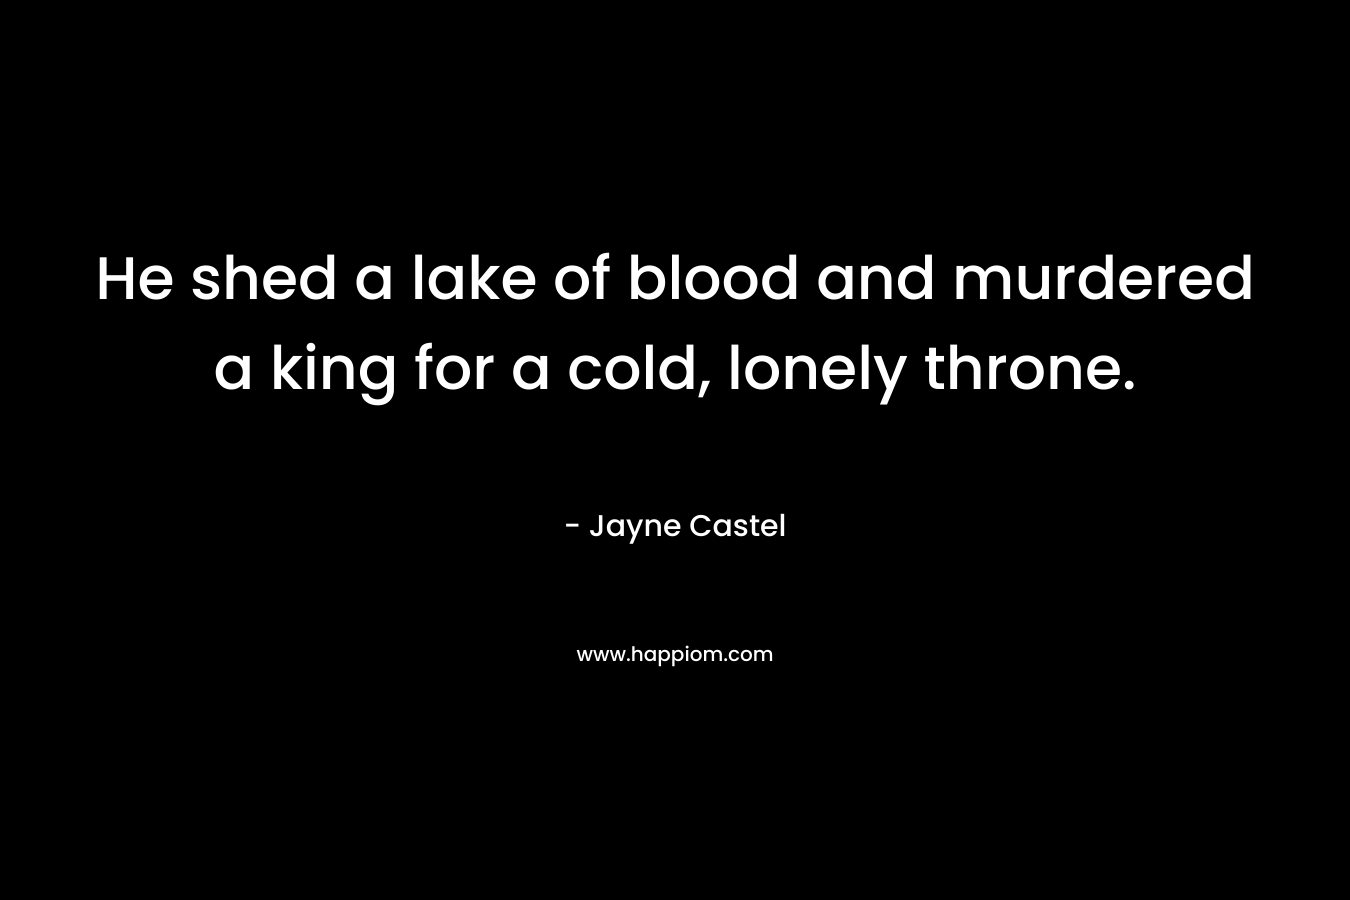 He shed a lake of blood and murdered a king for a cold, lonely throne. – Jayne Castel